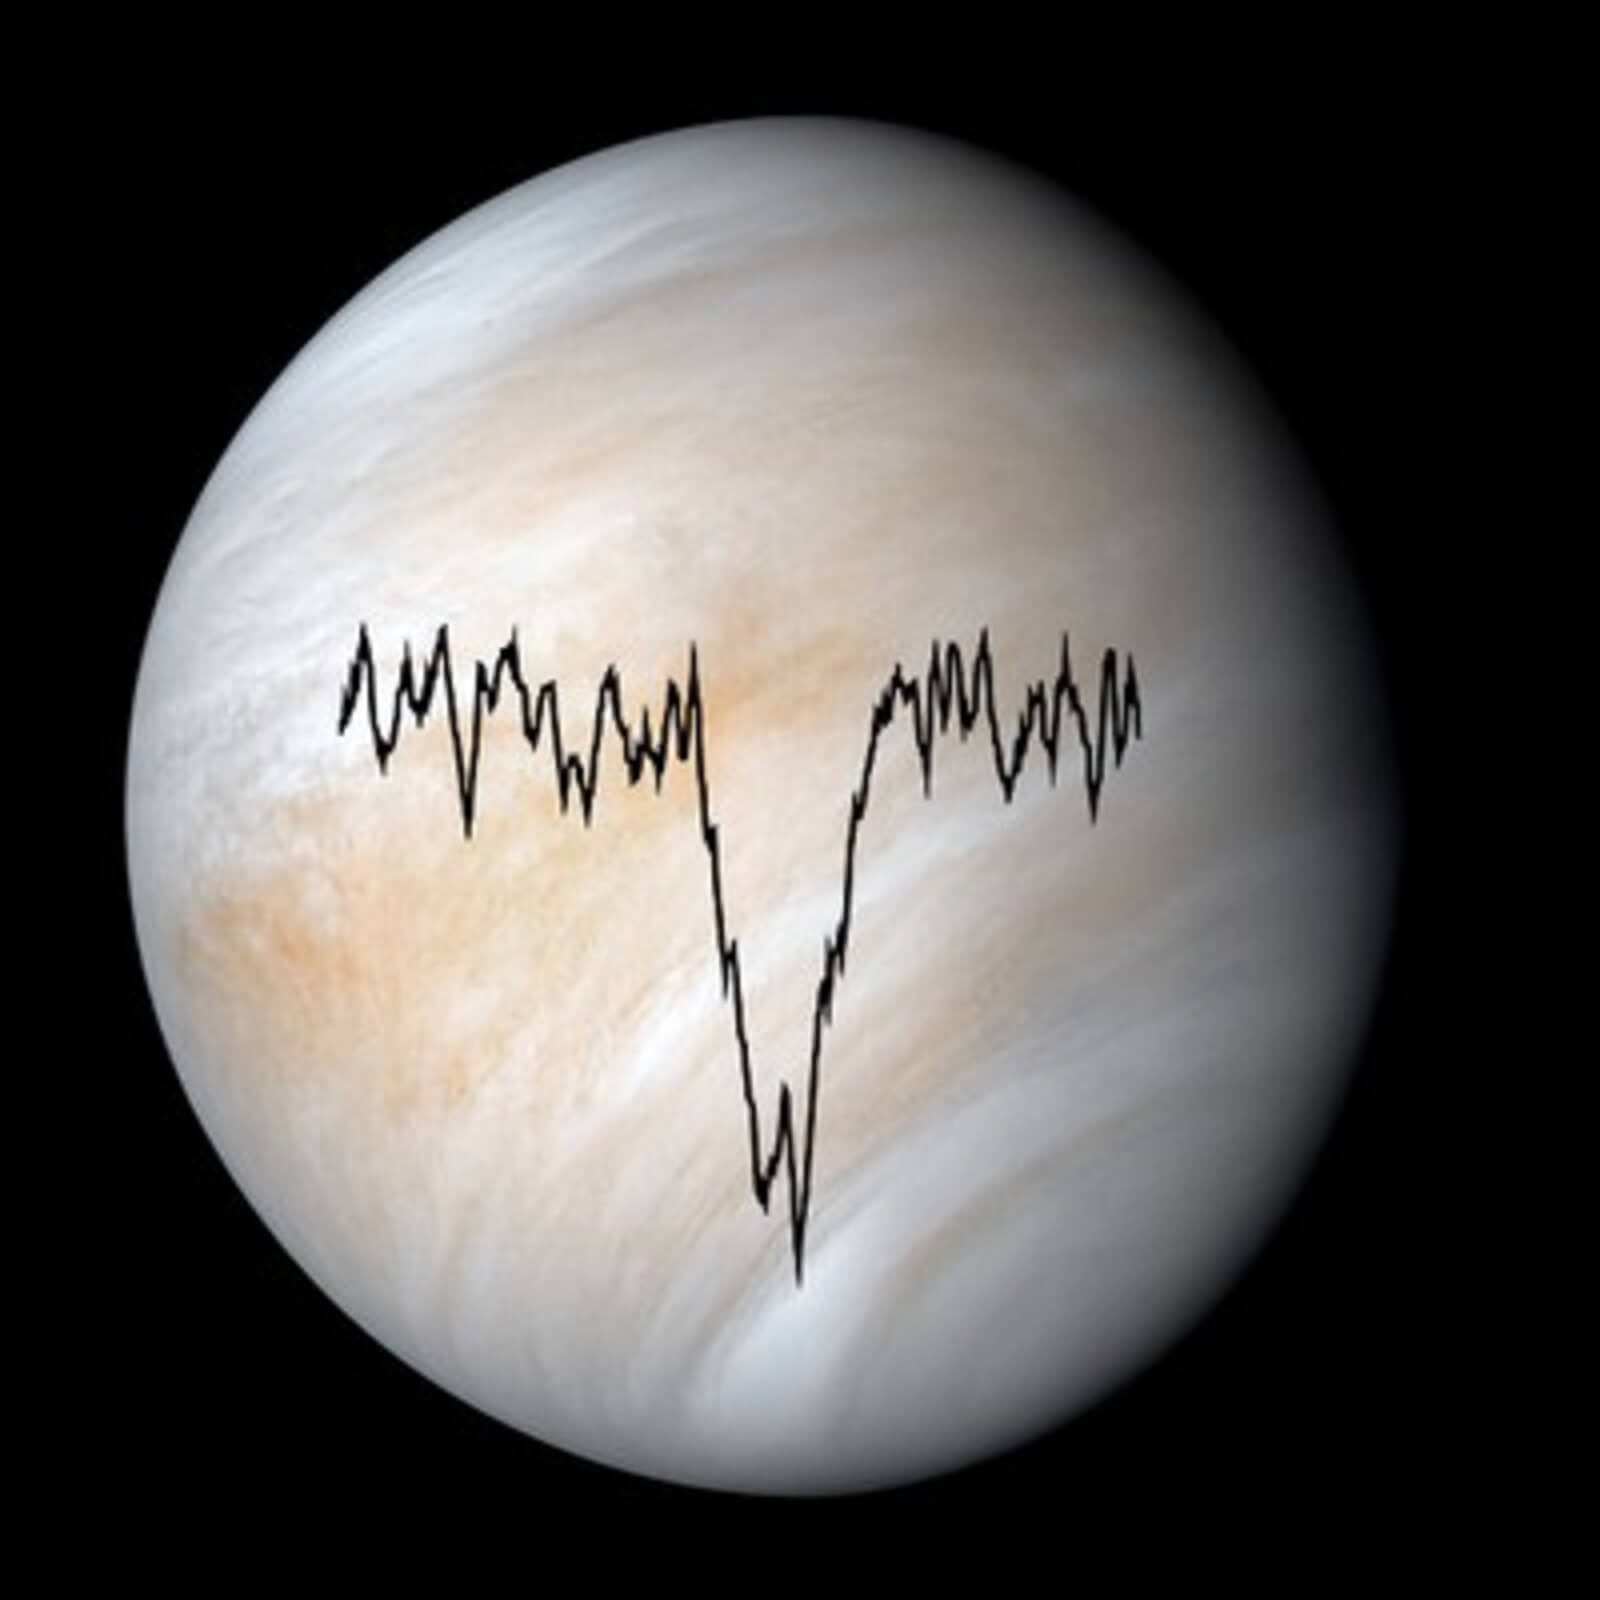 The Venus emissions was measured in a narrow frequency range around 4.74 terahertz (black line), which corresponds to a wavelength of 63.2 micrometers.